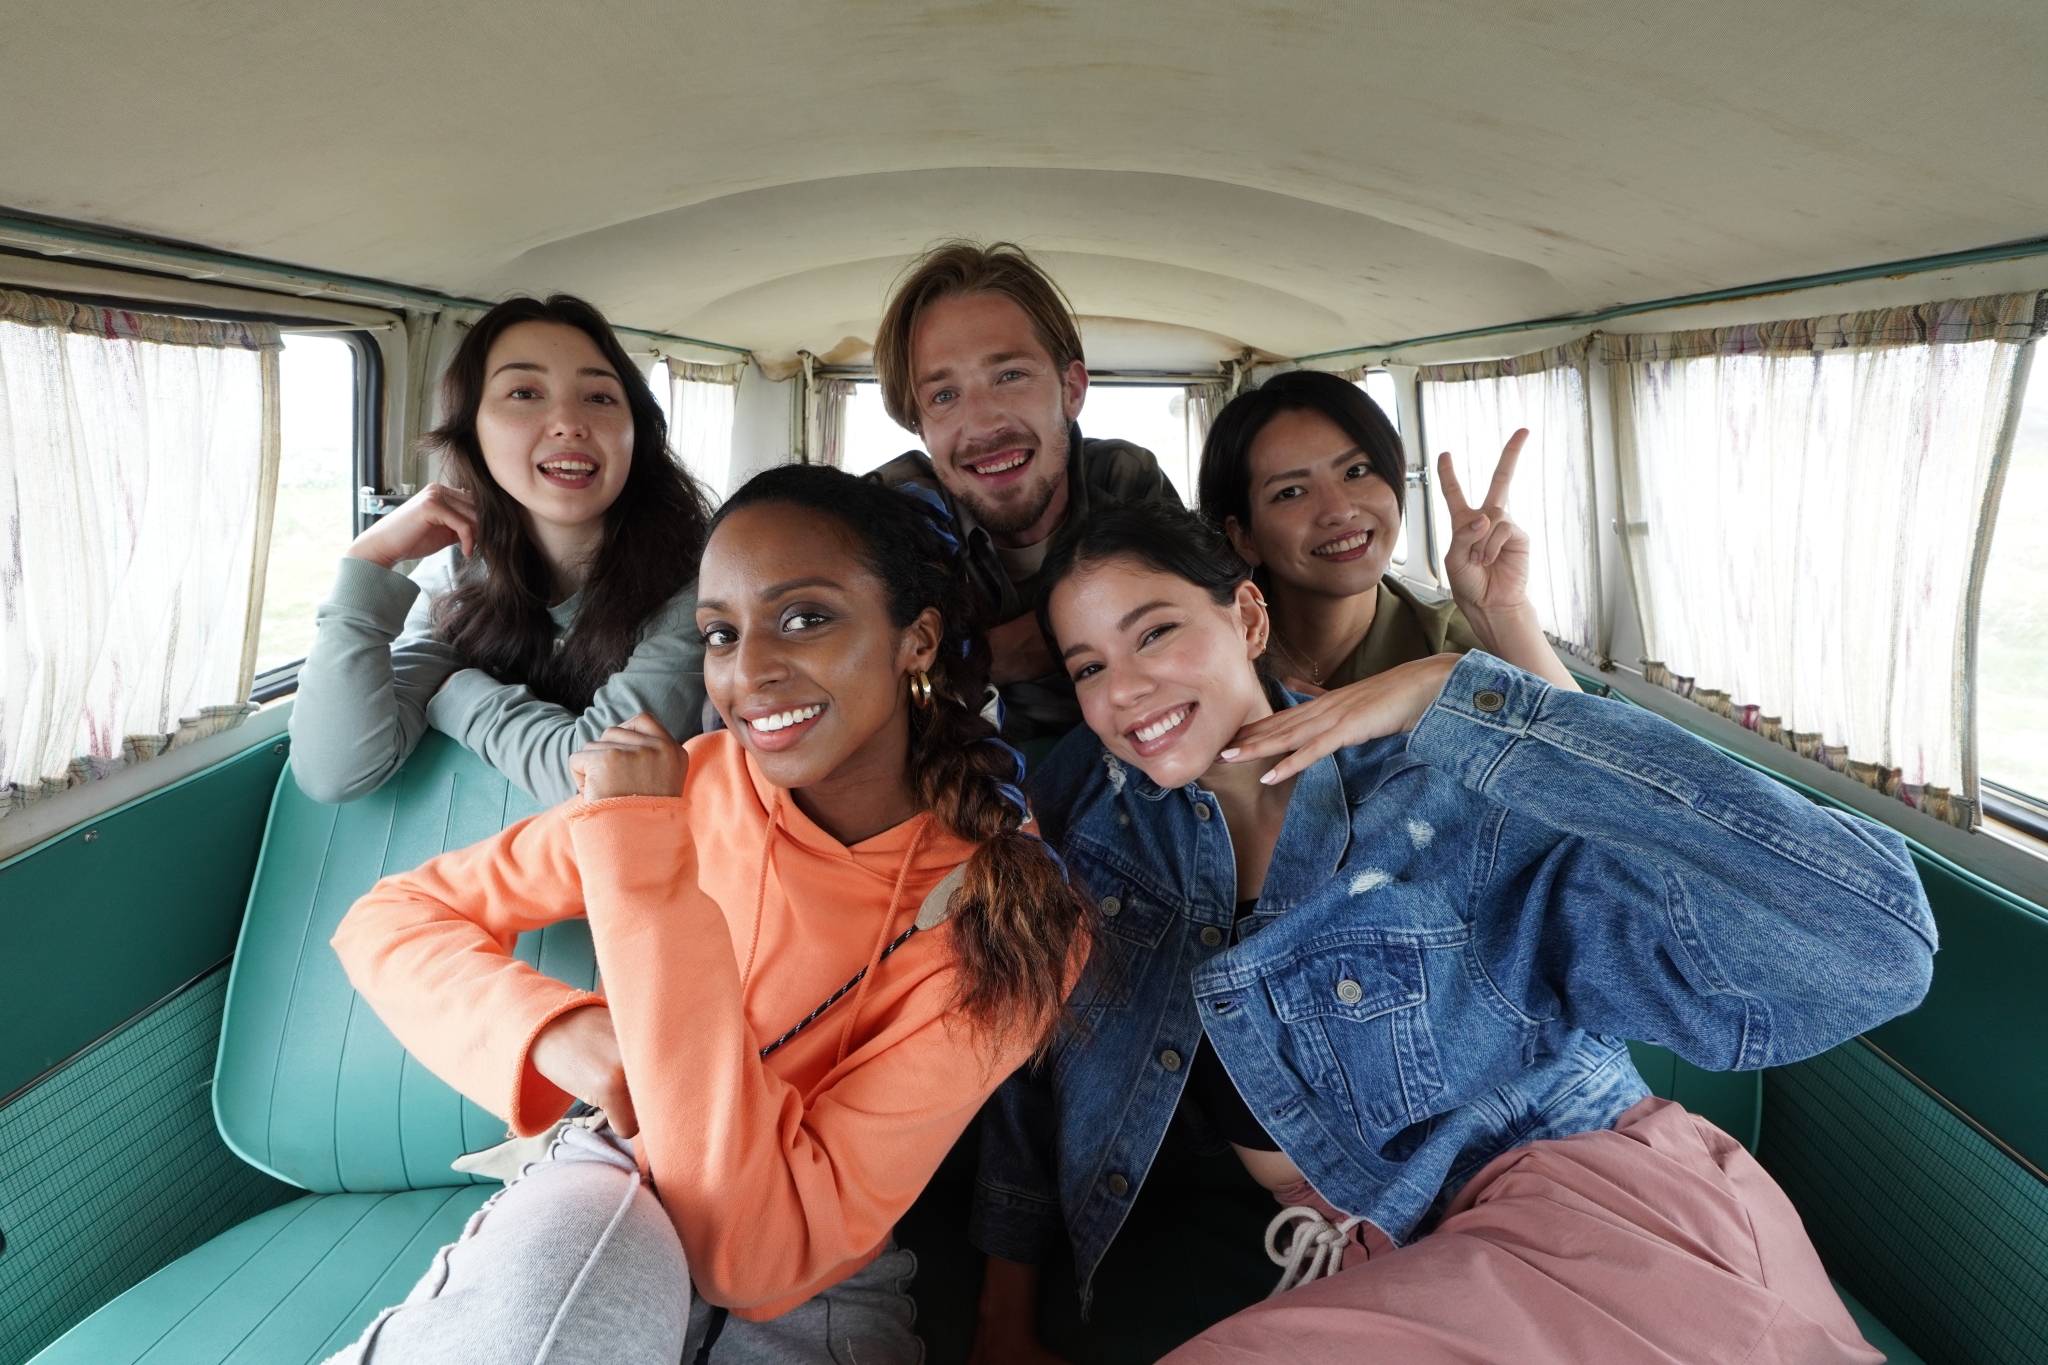 Group of five people posing for a photo inside a camper van